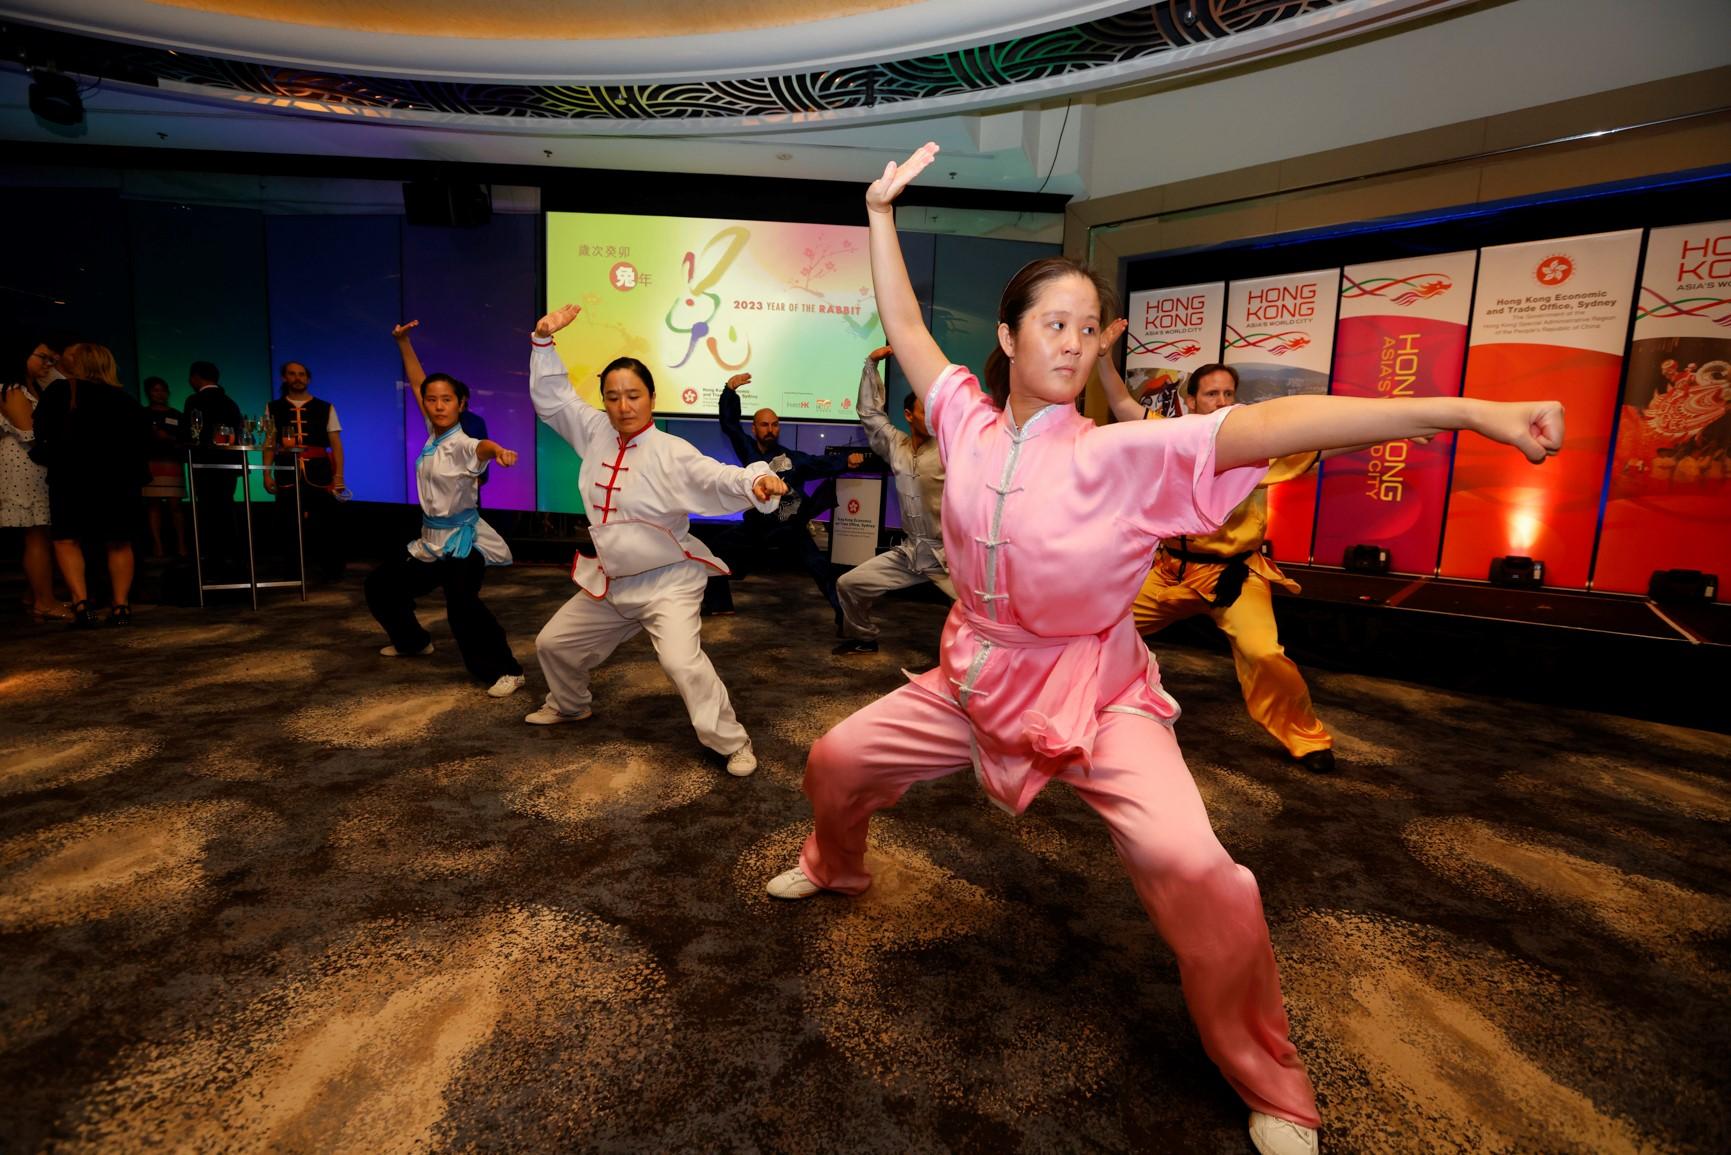 The Hong Kong Economic and Trade Office, Sydney hosted a reception in Melbourne, Australia, today (February 15) to celebrate the Year of the Rabbit. Photo shows a martial arts performance staged at the reception.